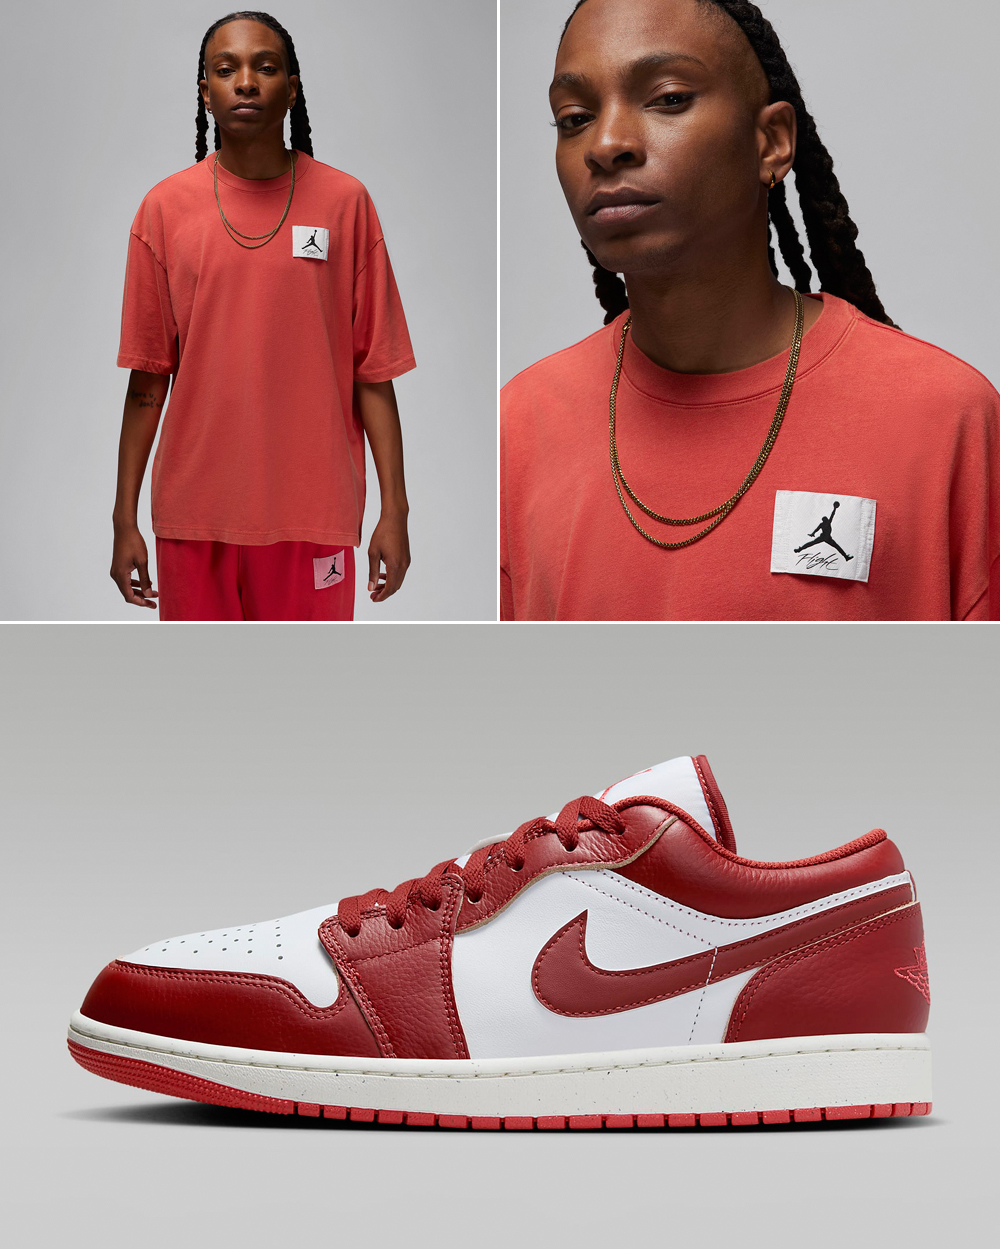 Air-Jordan-1-Low-SE-White-Lobster-Dune-Red-Shirt-Outfit